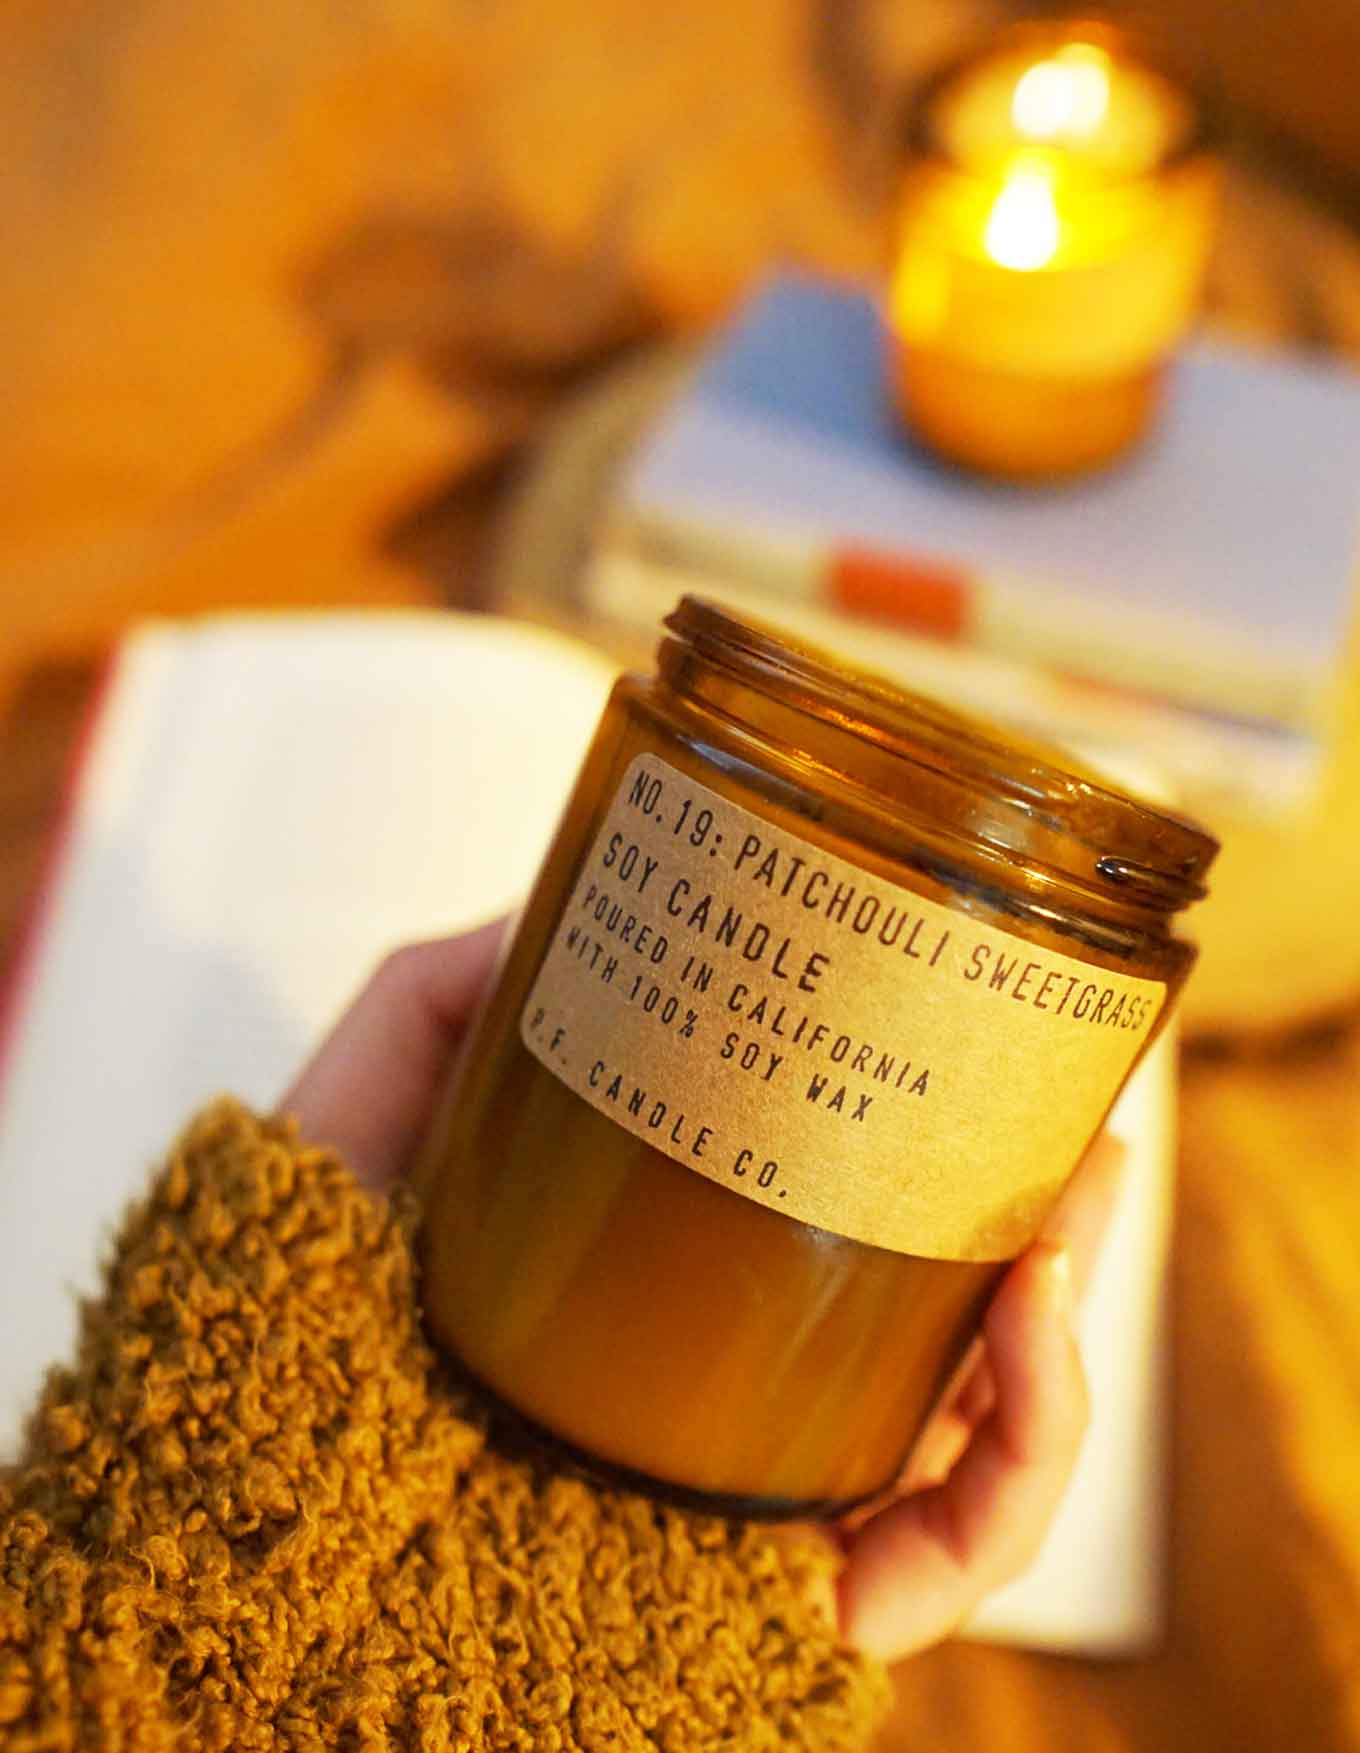 Hand holding a new candle with a label that says No 04: Teakwood & Tobacco, Soy Candle, Poured in California with 100% soy wax, P.F. Candle Co